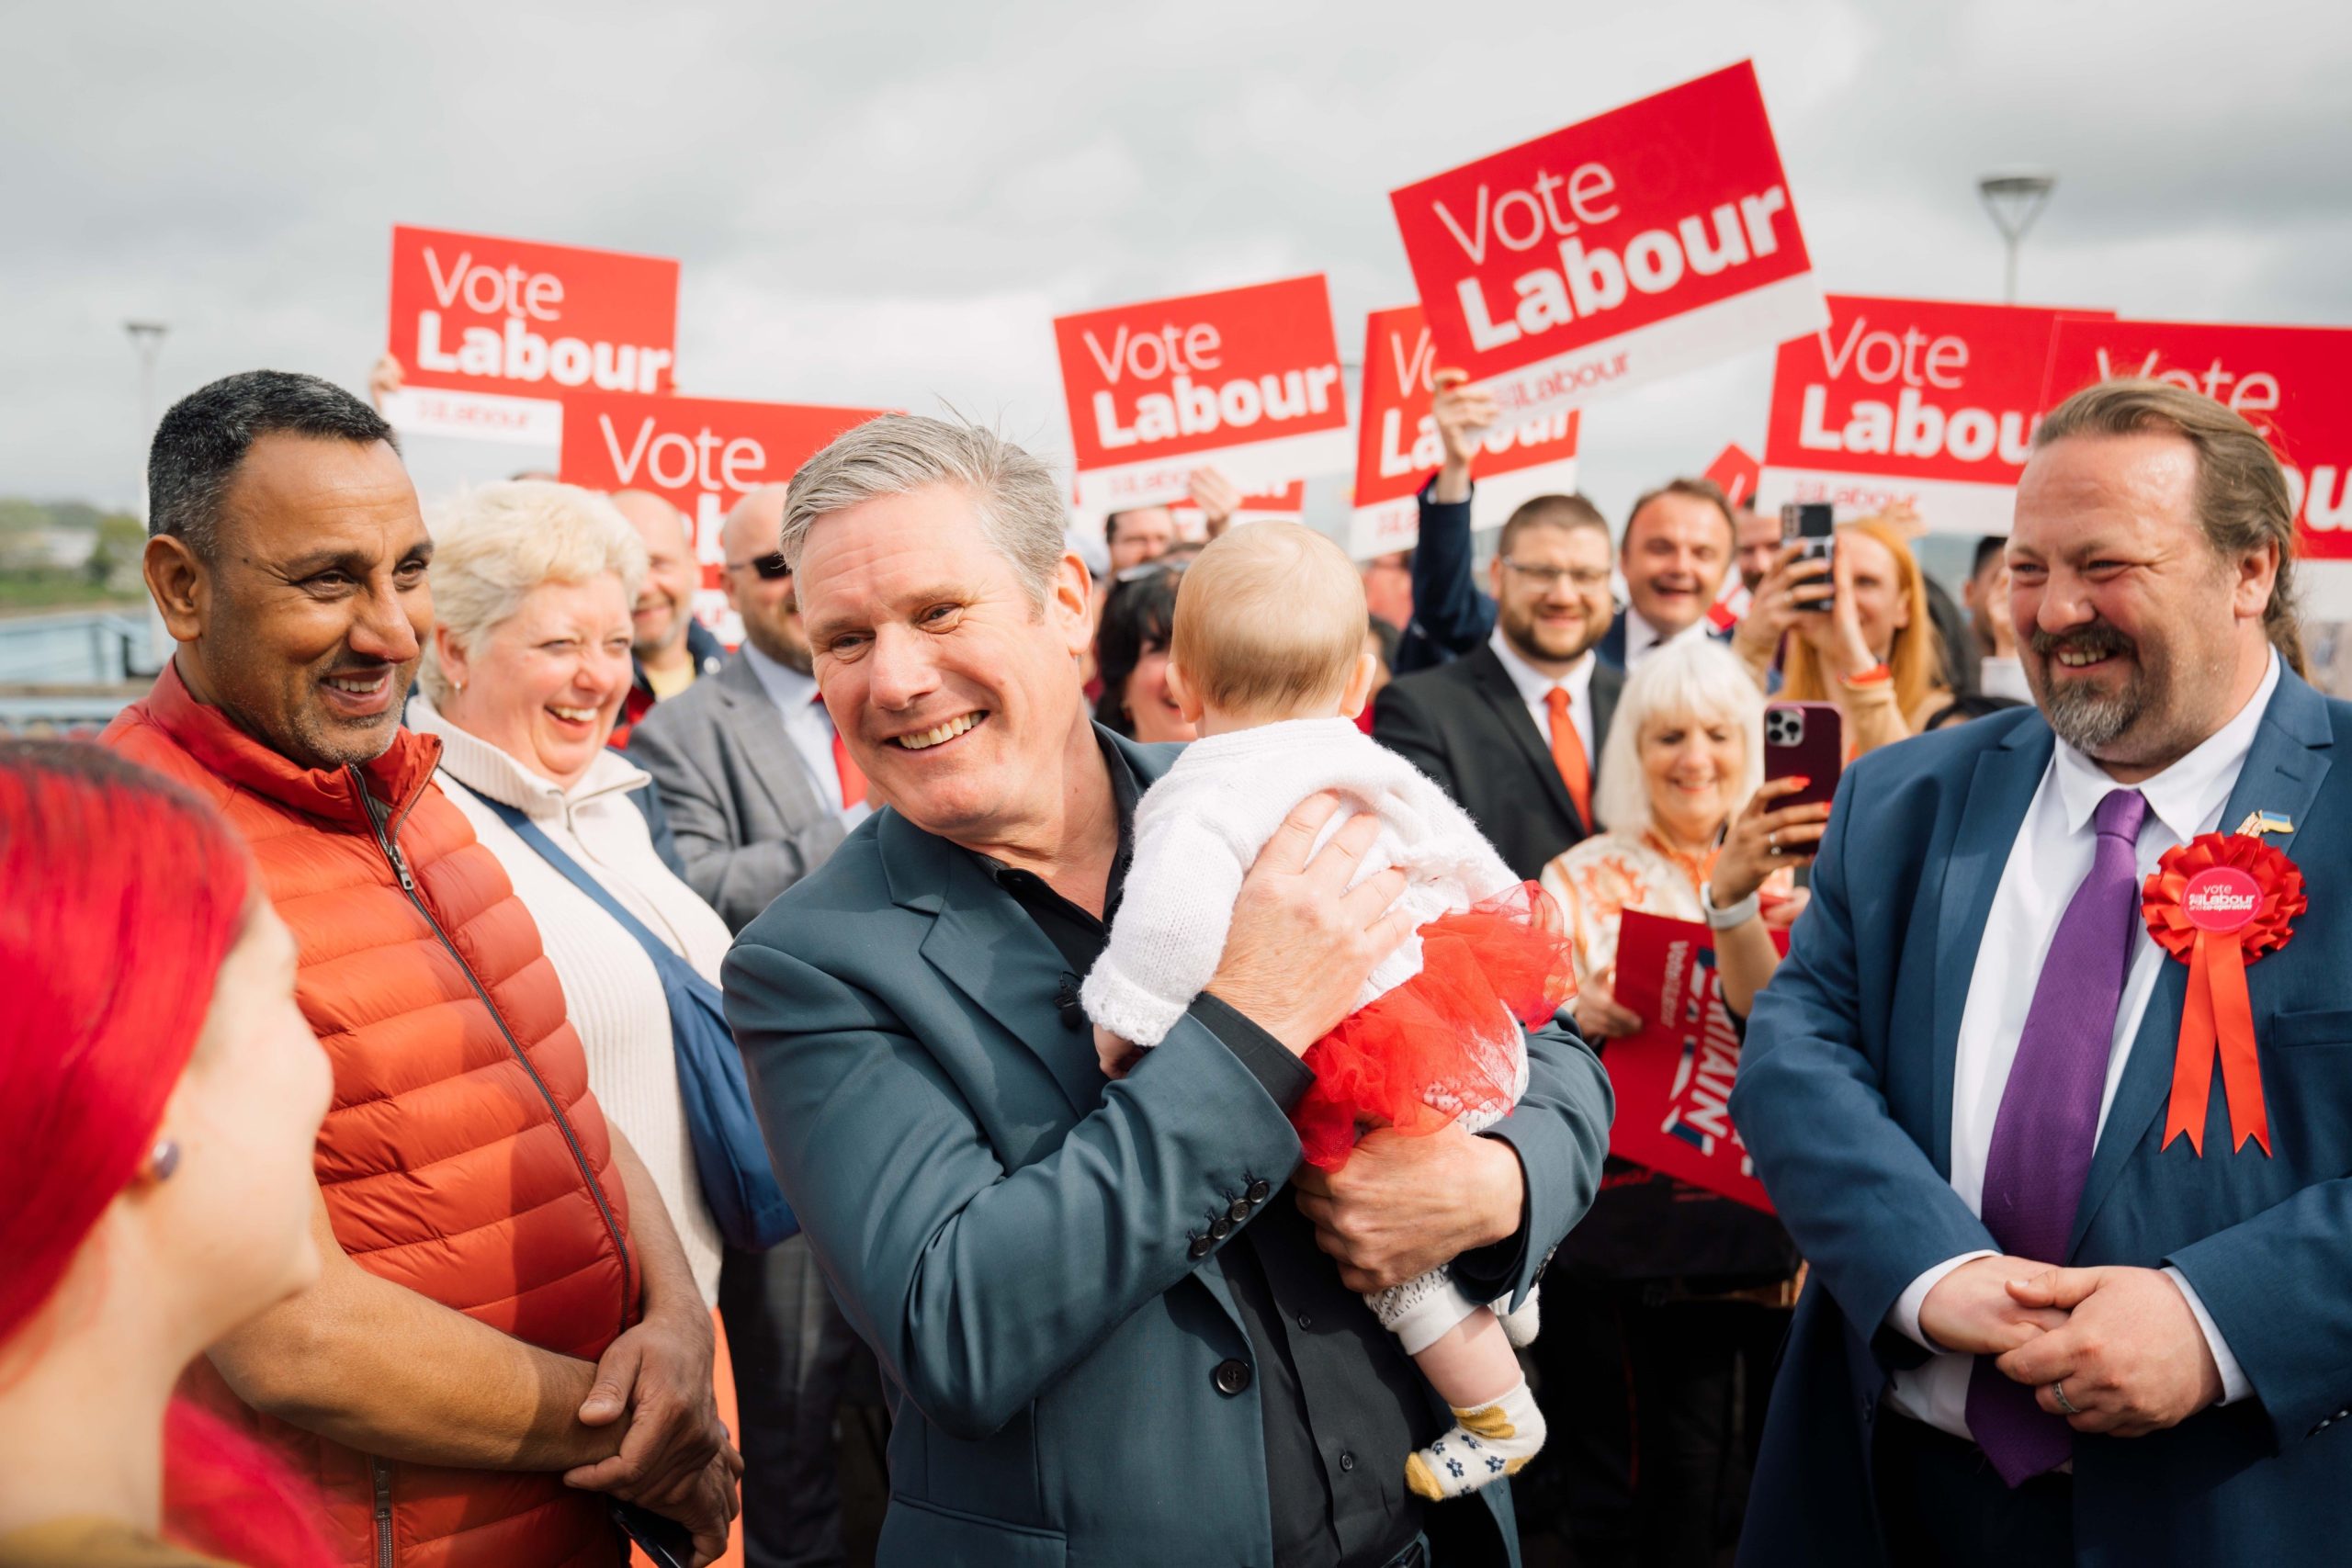 Labour’s win in Selby paves way for victory in Hexham